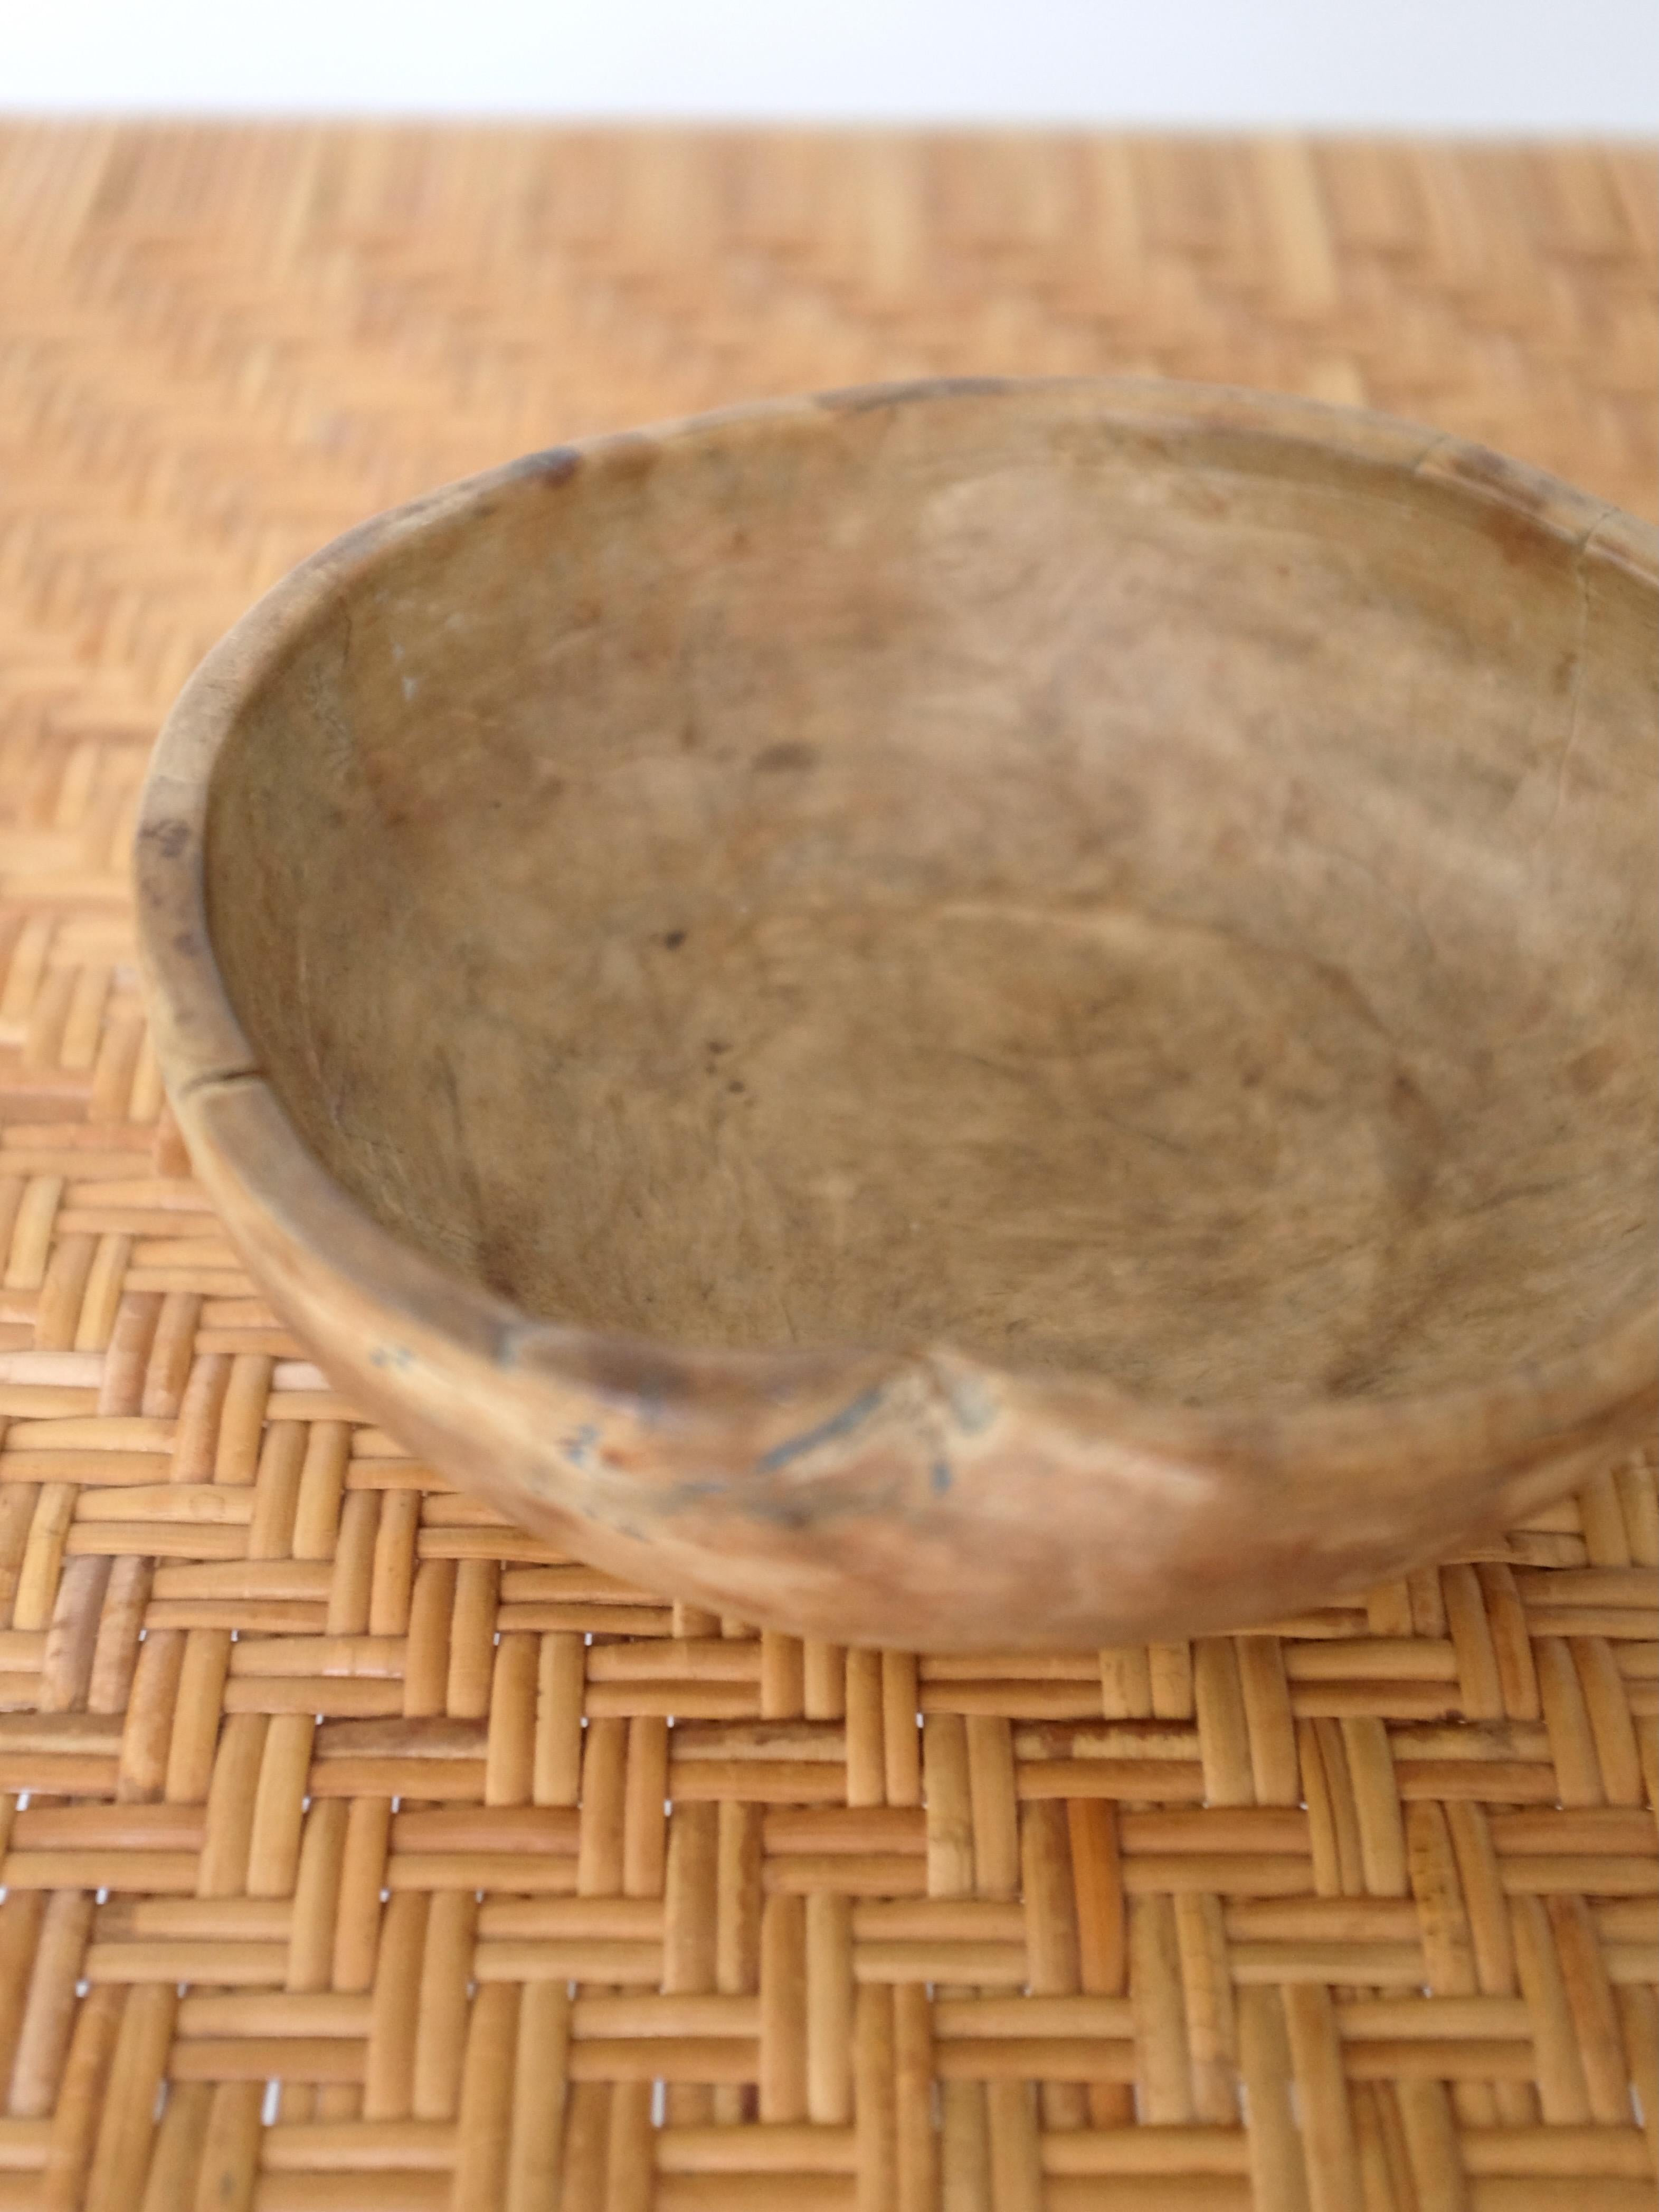 Gorgeous Antique Swedish wooden bowl dated 1887. Unique shape with age appropriate wear and patina. 

Country: Sweden

Year: 1887

Dimensions: W 7.4 in. x H 2.7 in.